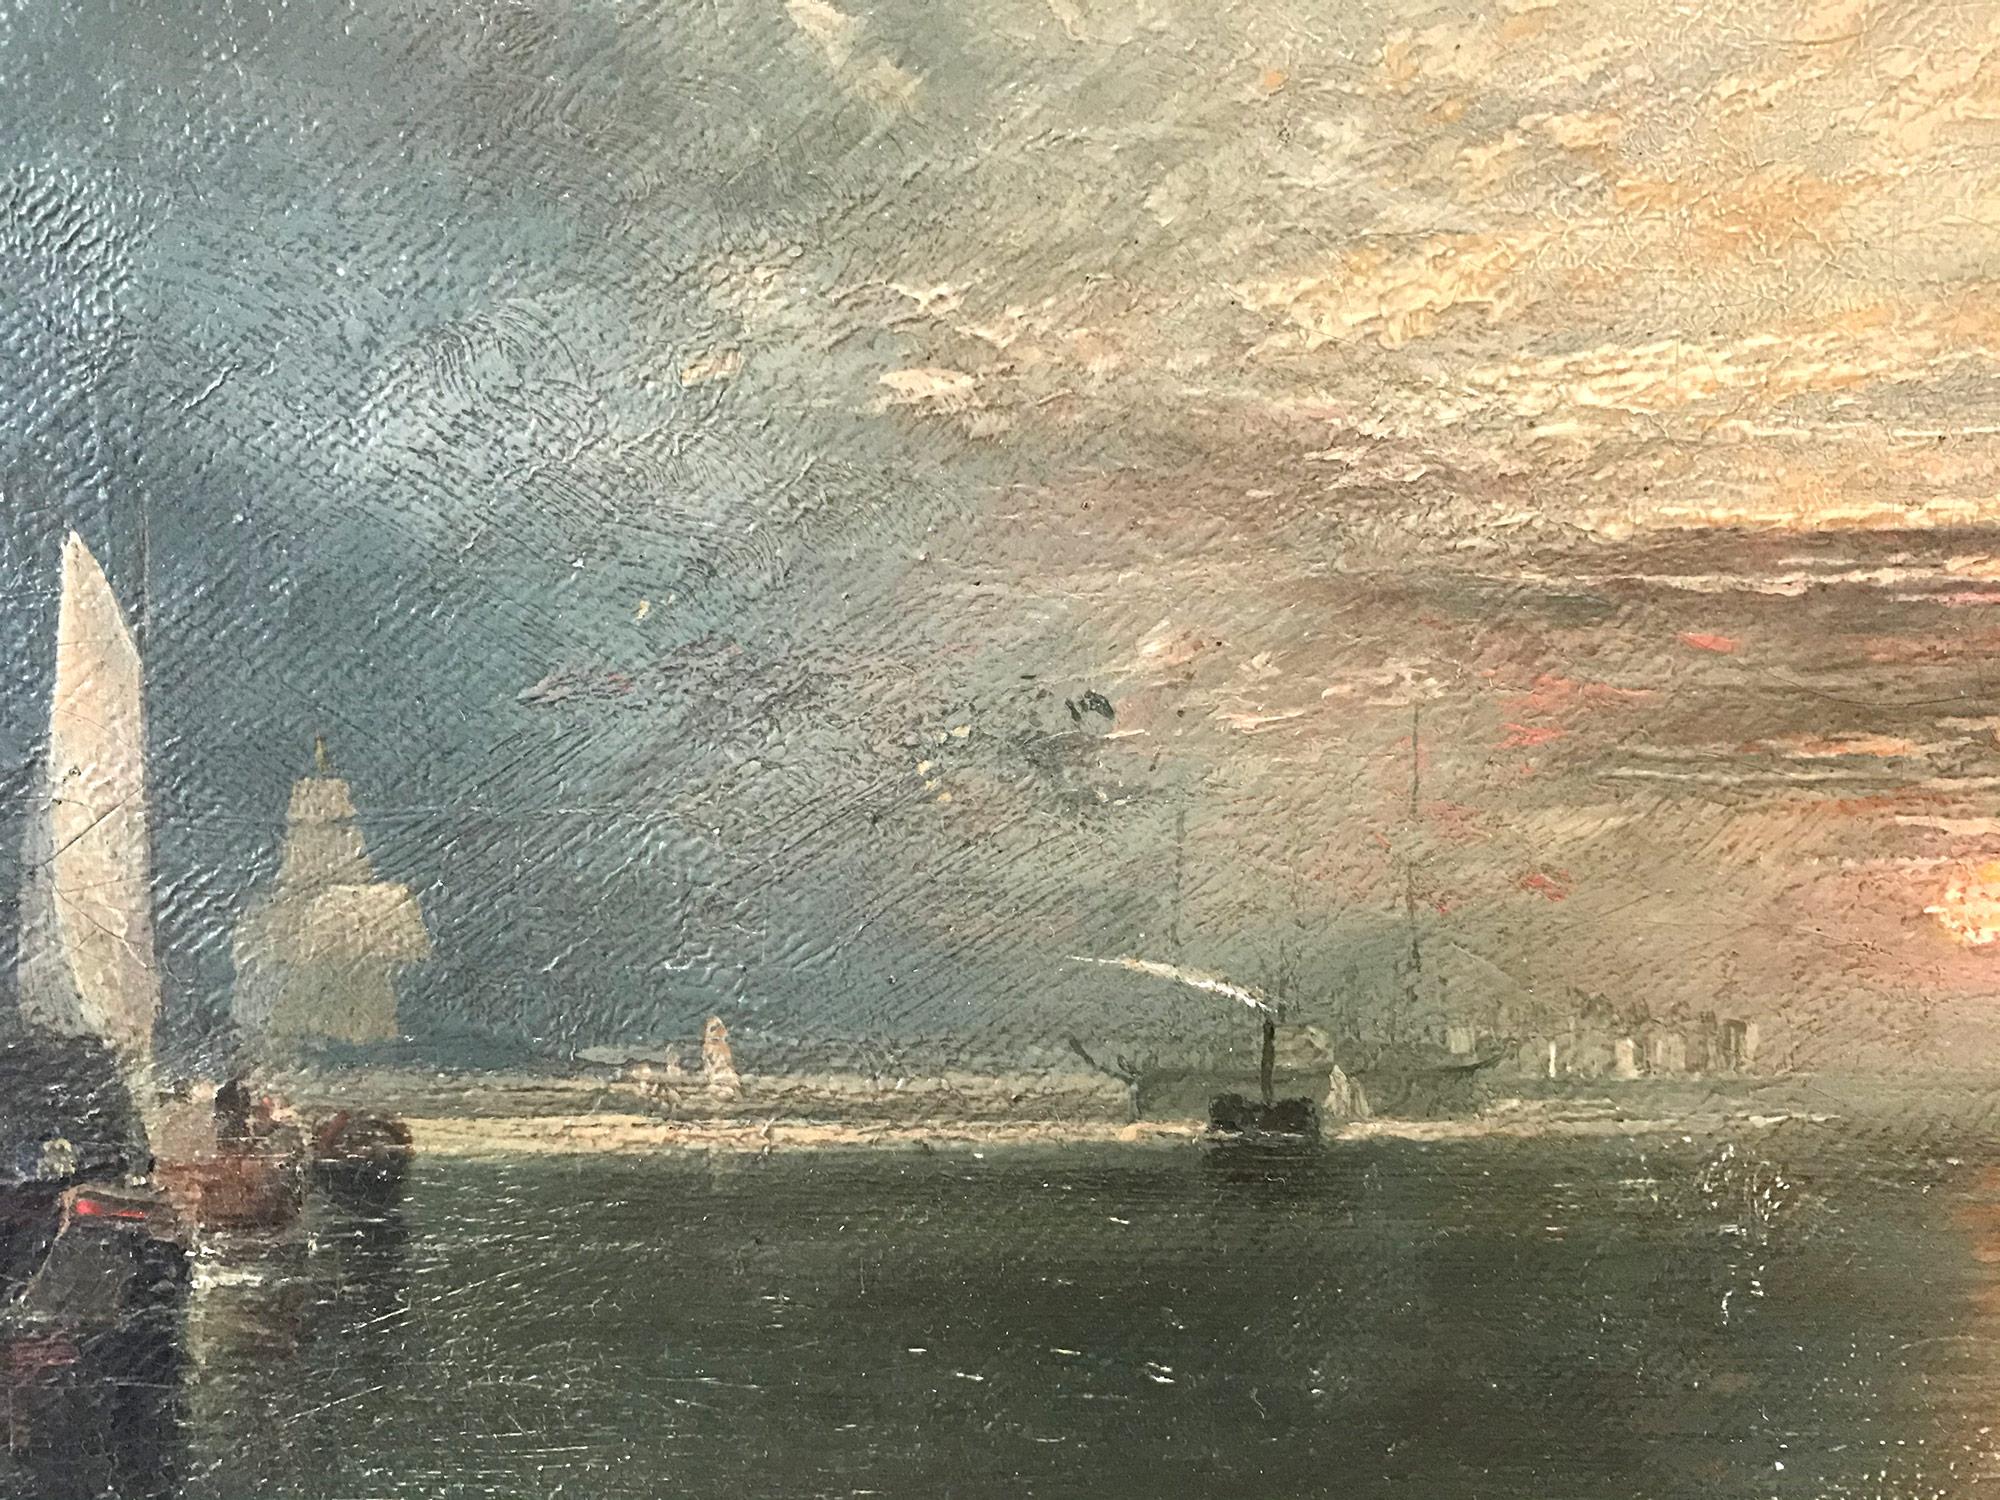 An exquisite oil painting After the Great Joseph Mallord William Turner. This rare oil is an exceptional render of the historic Temeraire, which was a 98-gun second-rate ship of the line of the Royal Navy. Launched in 1798, she served during the